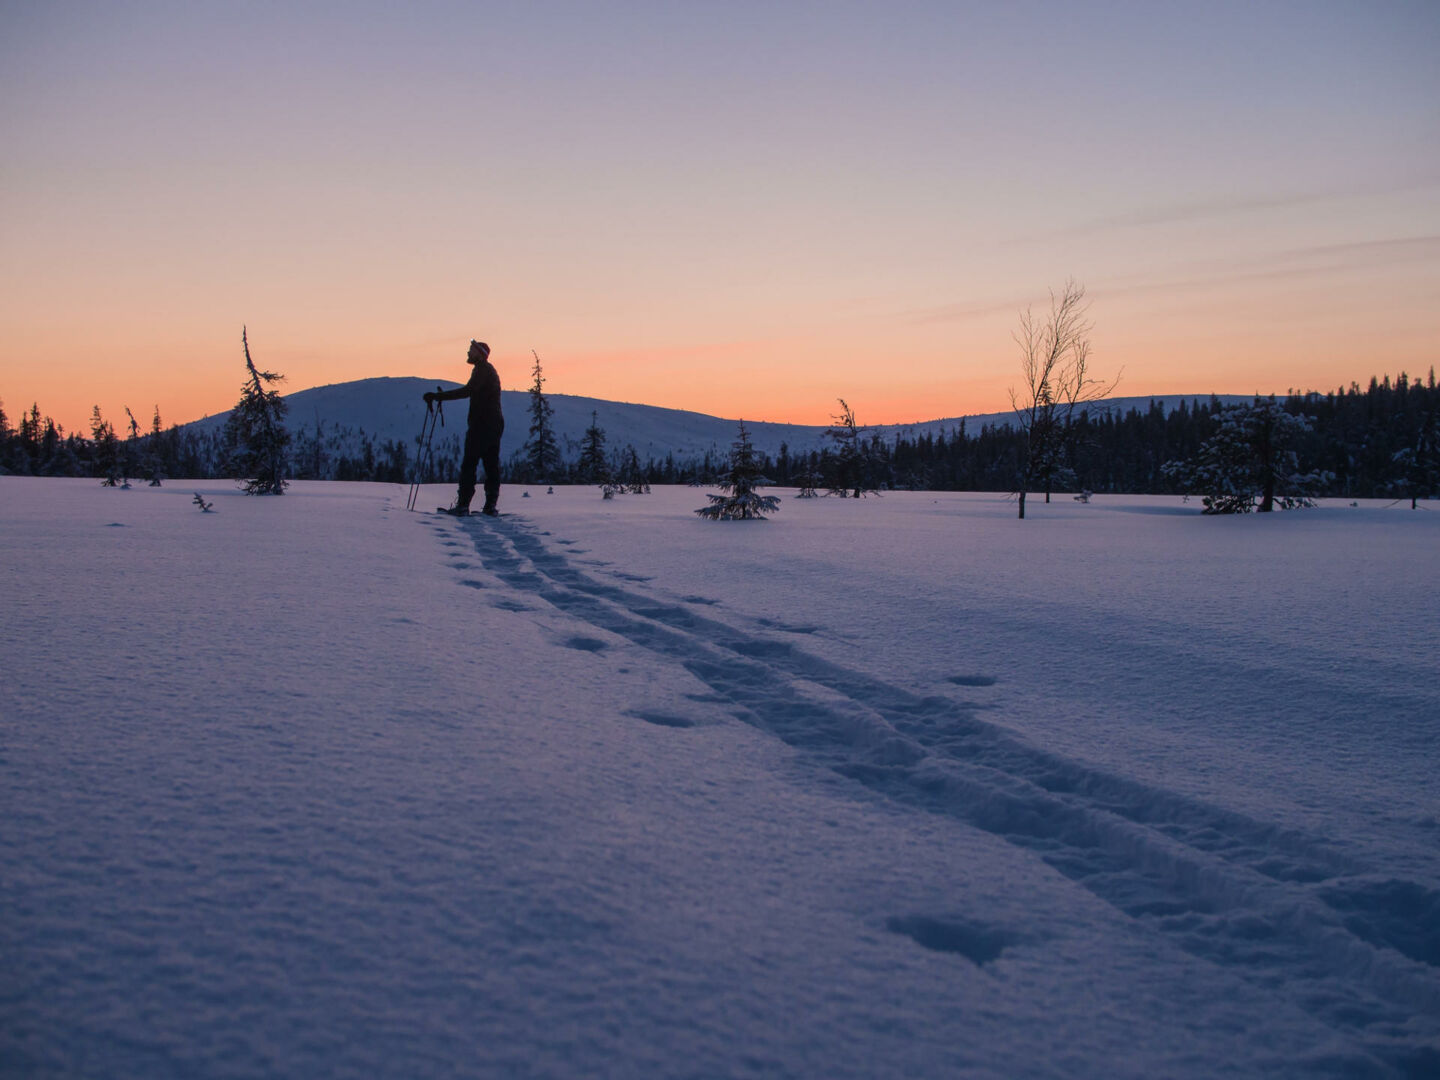 Filming Finland in Polar night means cinematic winter magic